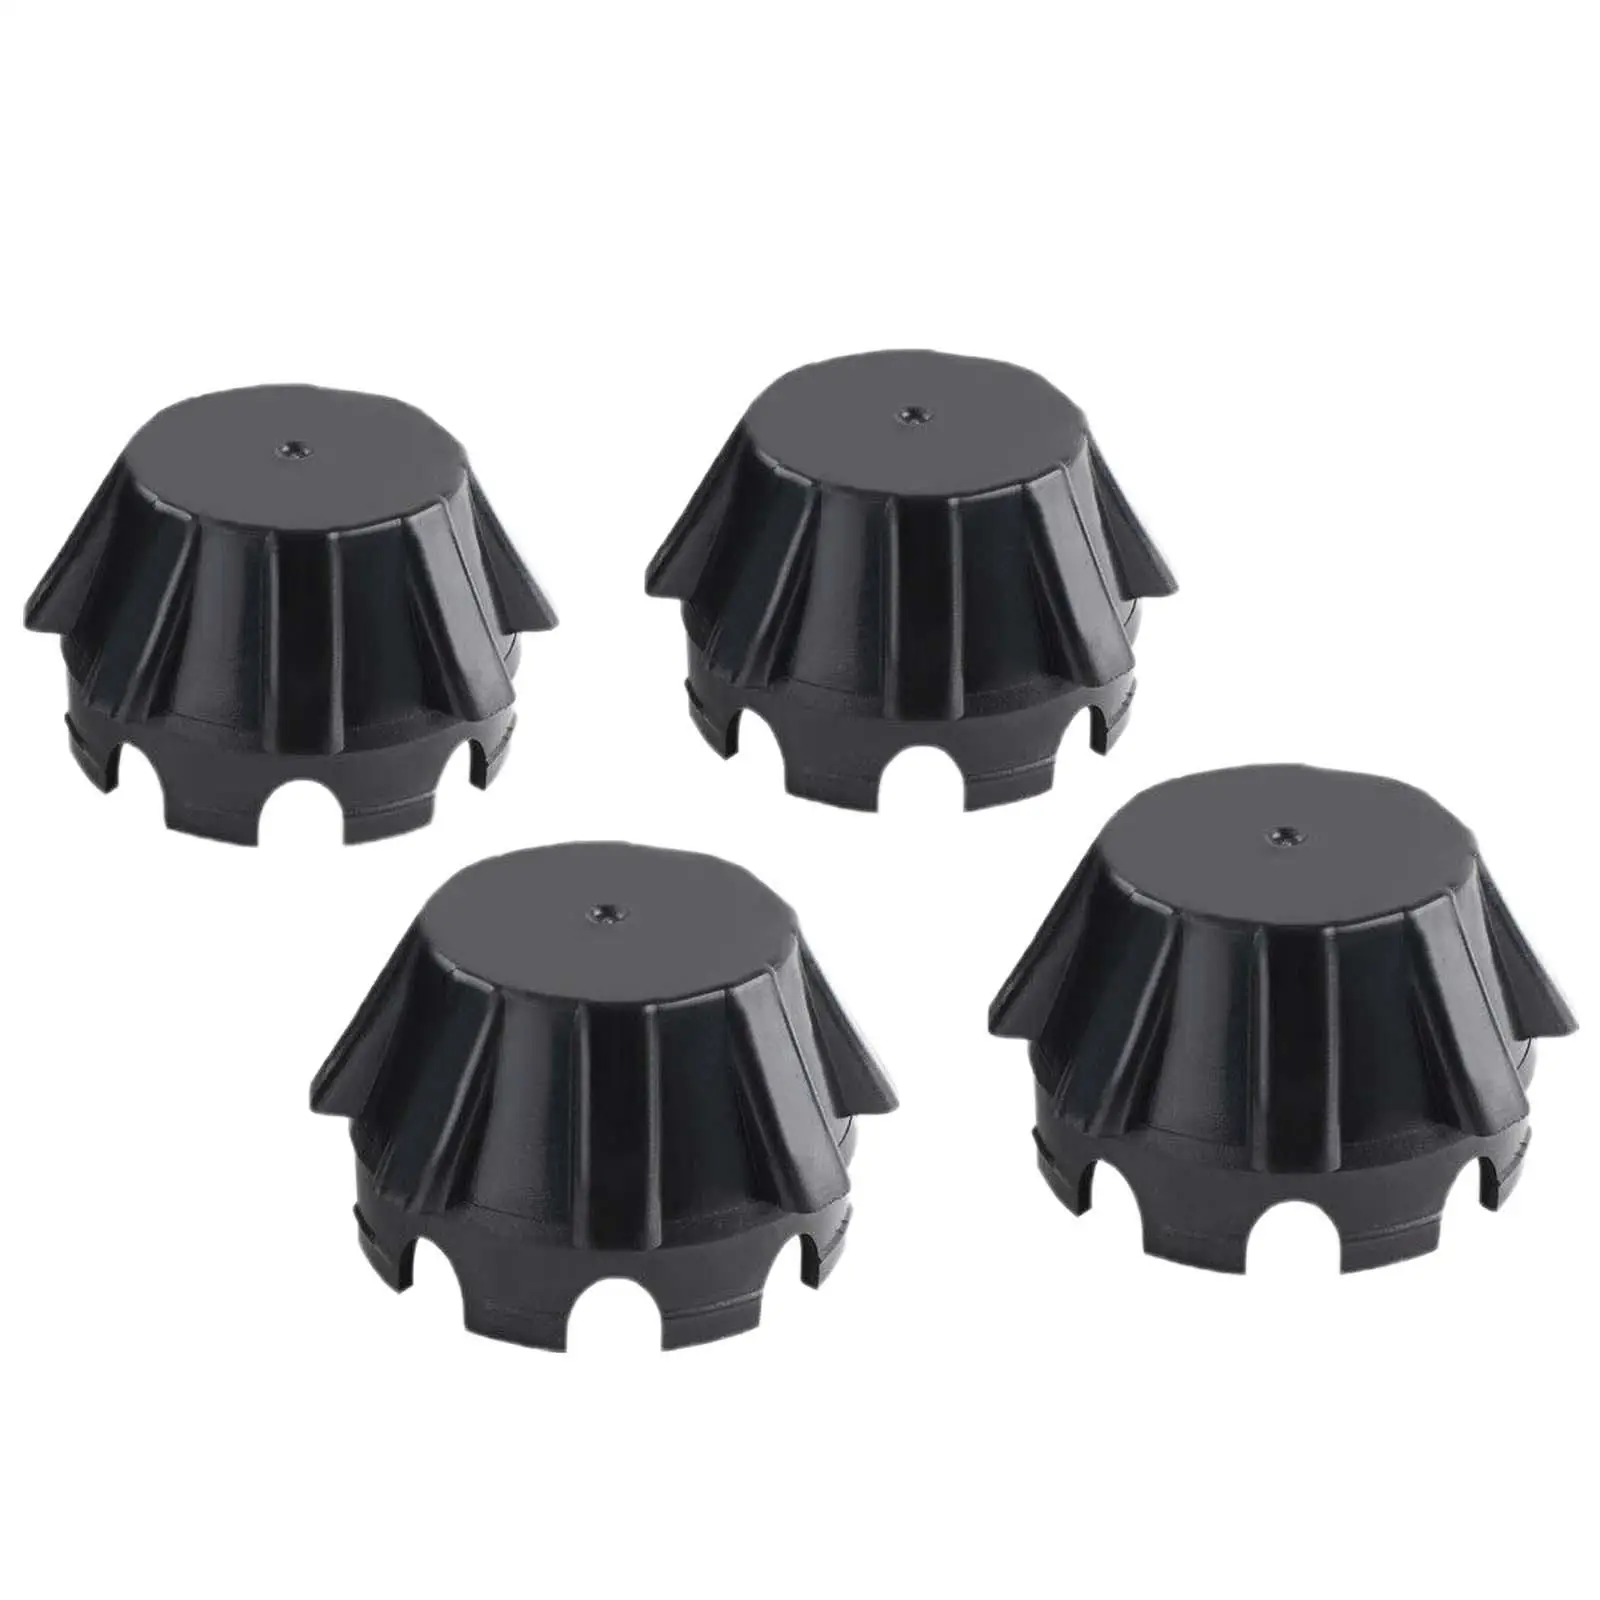 4x Wheel Center Hub Caps Cover Accessories for Kawasaki Krx 1000 High Reliability Sturdy Professional Stable Performance